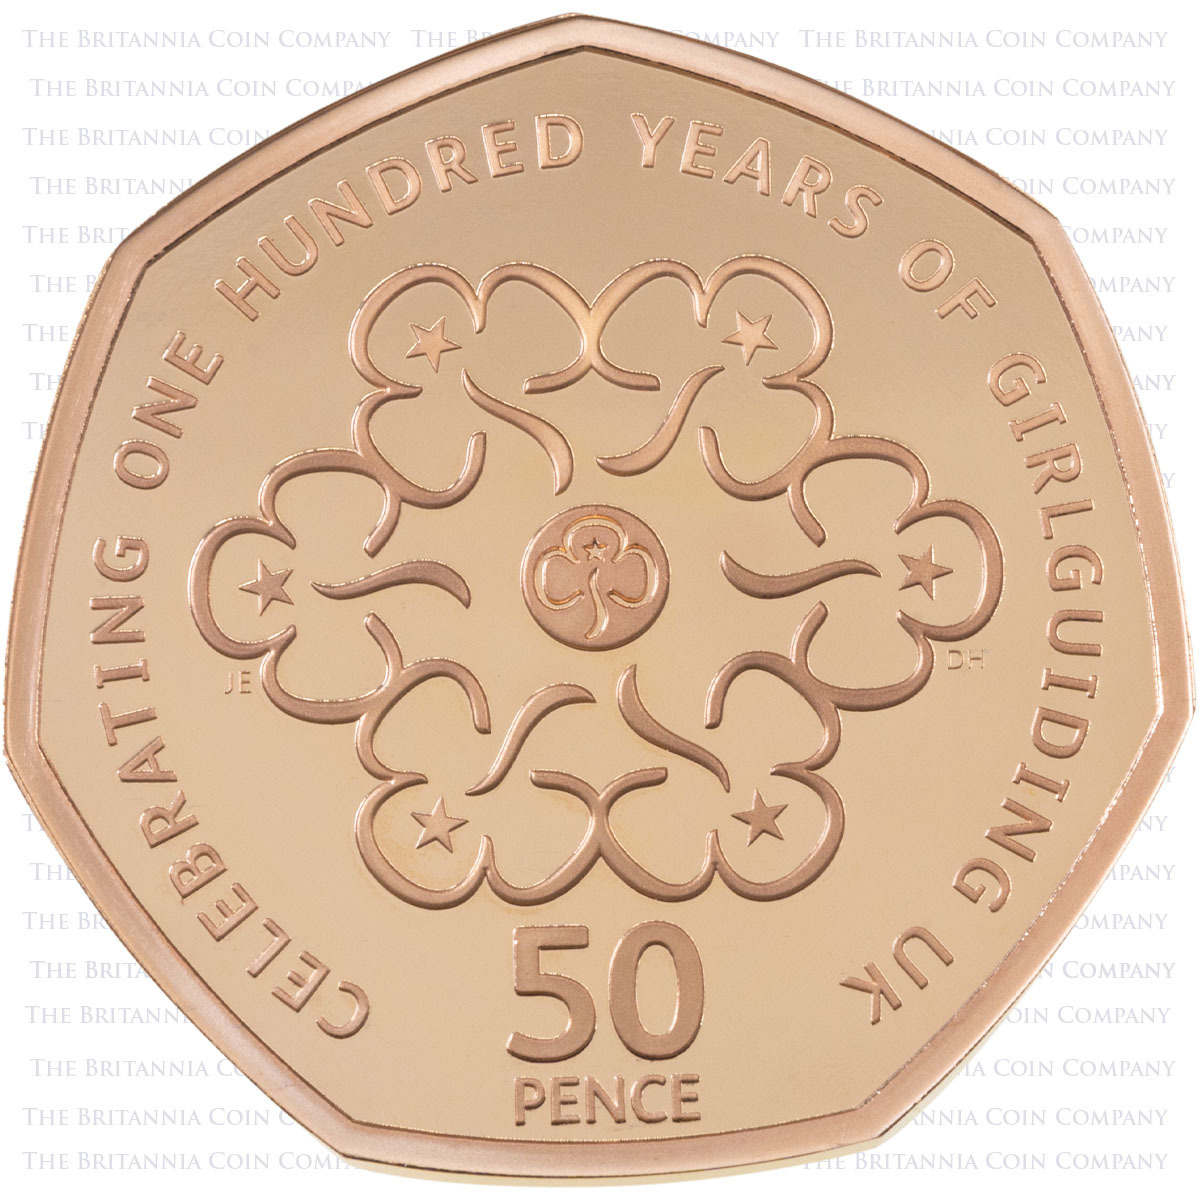 UK195CGP 2019 British Culture Fifty Pence Gold Proof 5 Coin Set Guides Reverse